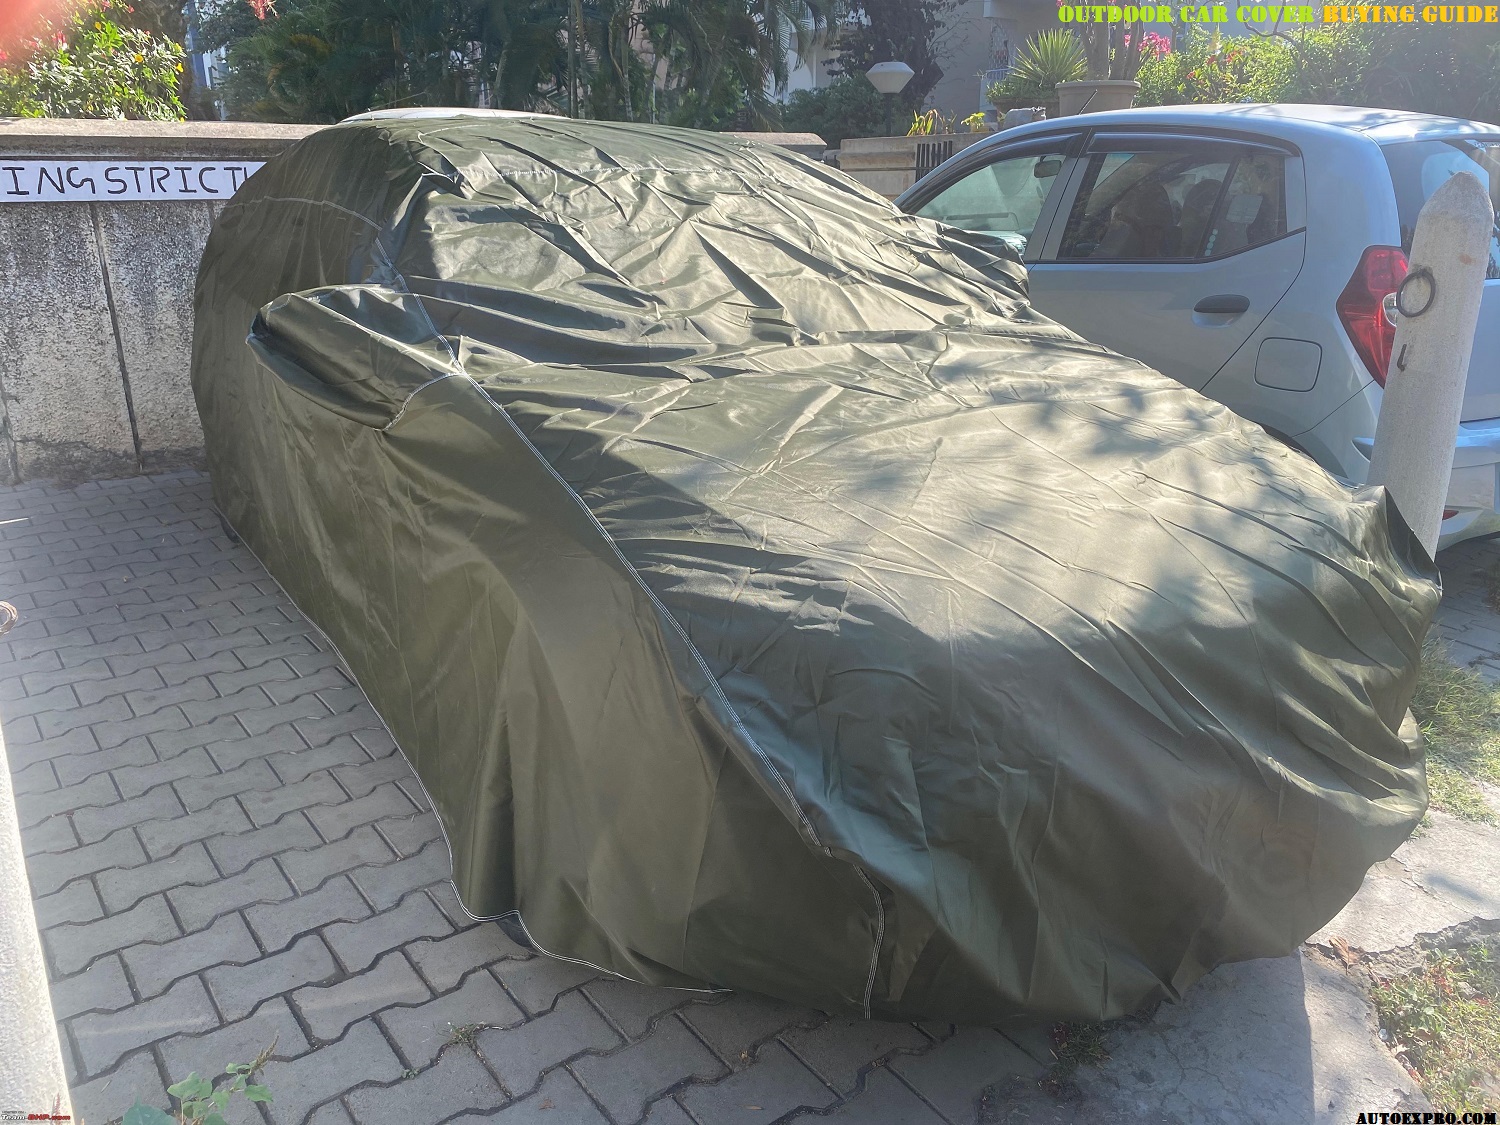 Outdoor Car Cover Buying Guide